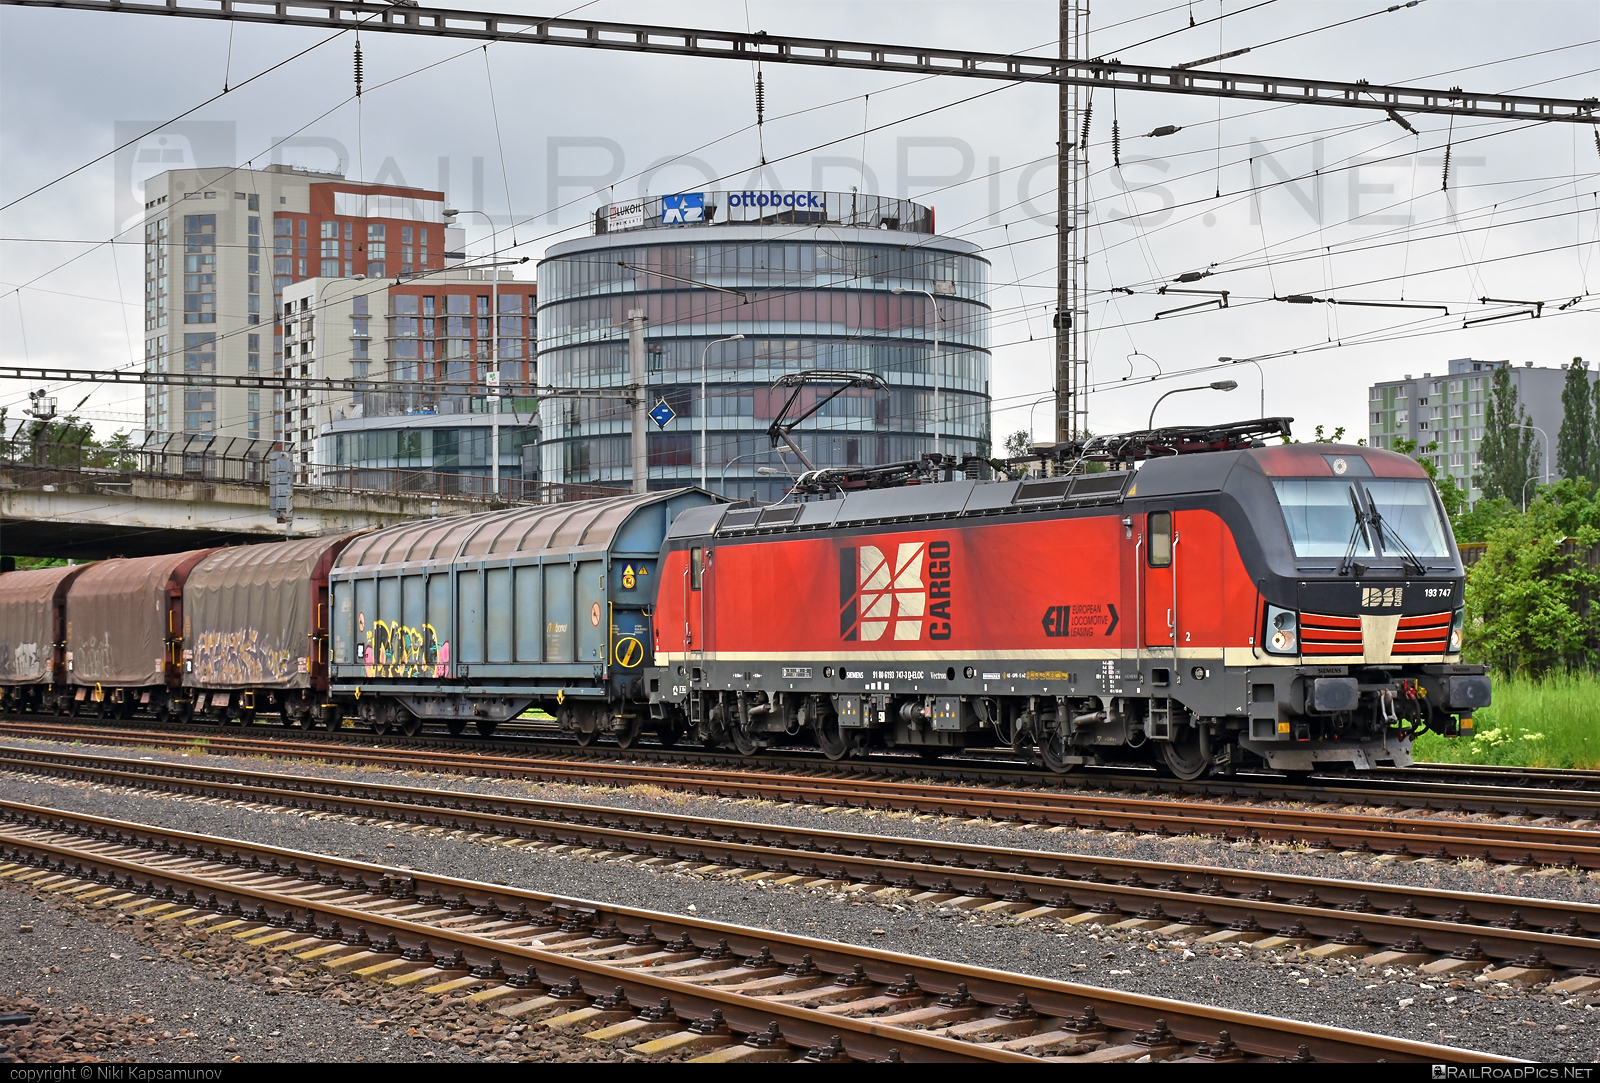 Siemens Vectron MS - 193 747 operated by IDS CARGO a. s. #ell #ellgermany #eloc #europeanlocomotiveleasing #idsc #idscargo #siemens #siemensvectron #siemensvectronms #vectron #vectronms